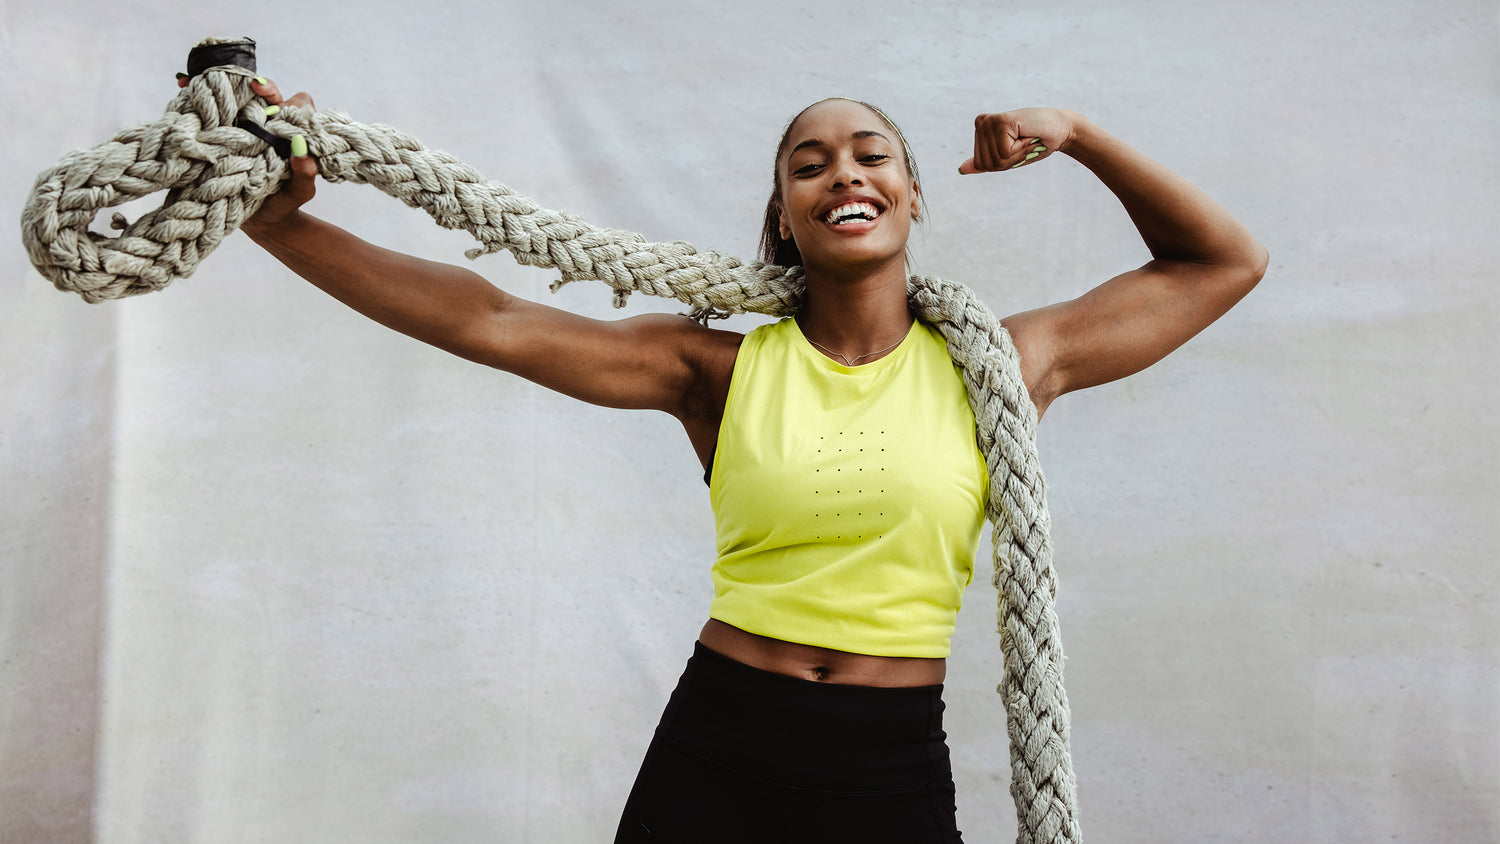 Strong African woman showing her muscular biceps with a battle rope. Fitness woman flexing arm muscles after cross training workout.